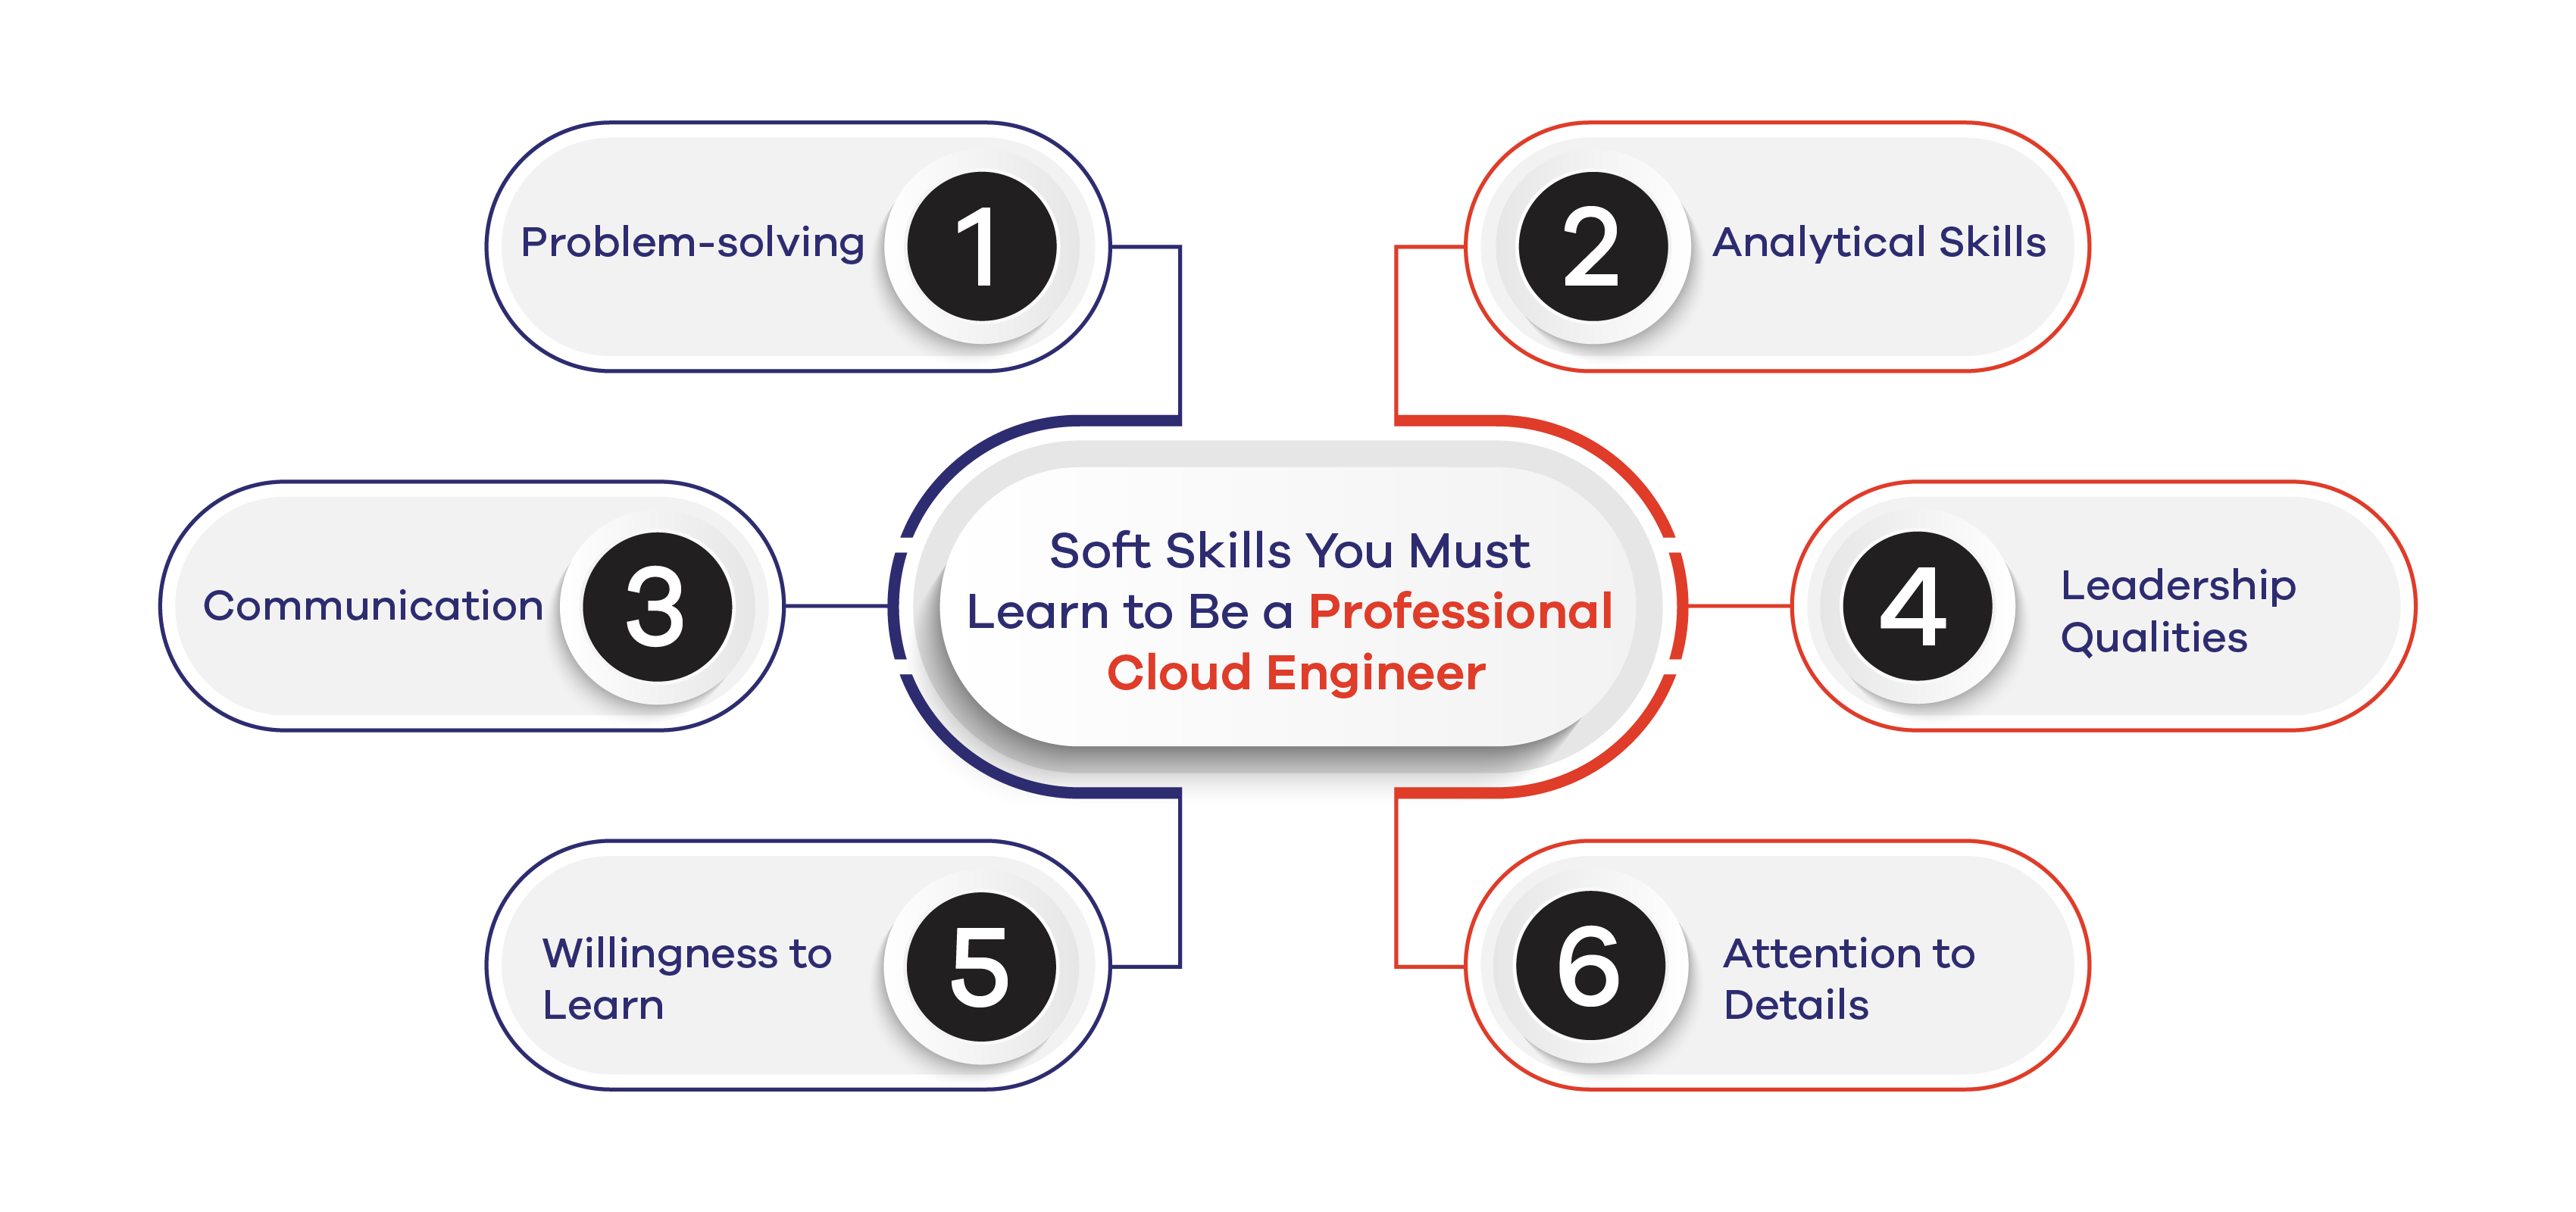 Soft Skills You Must Learn to Be a Professional Cloud Engineer 